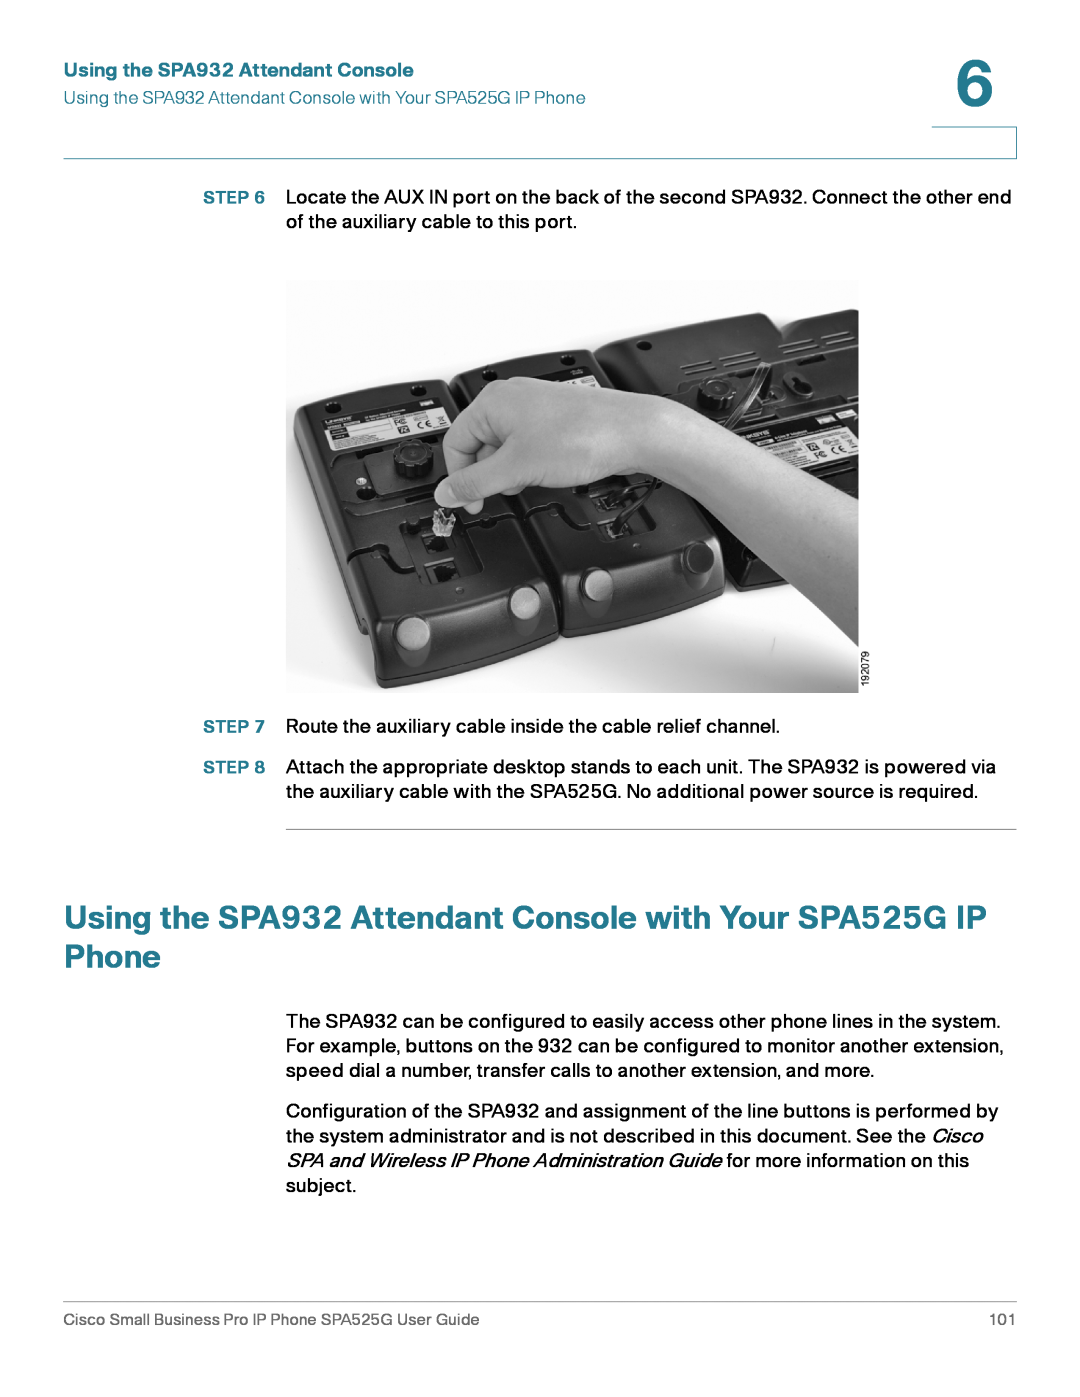 Cisco Systems manual Using the SPA932 Attendant Console with Your SPA525G IP Phone 